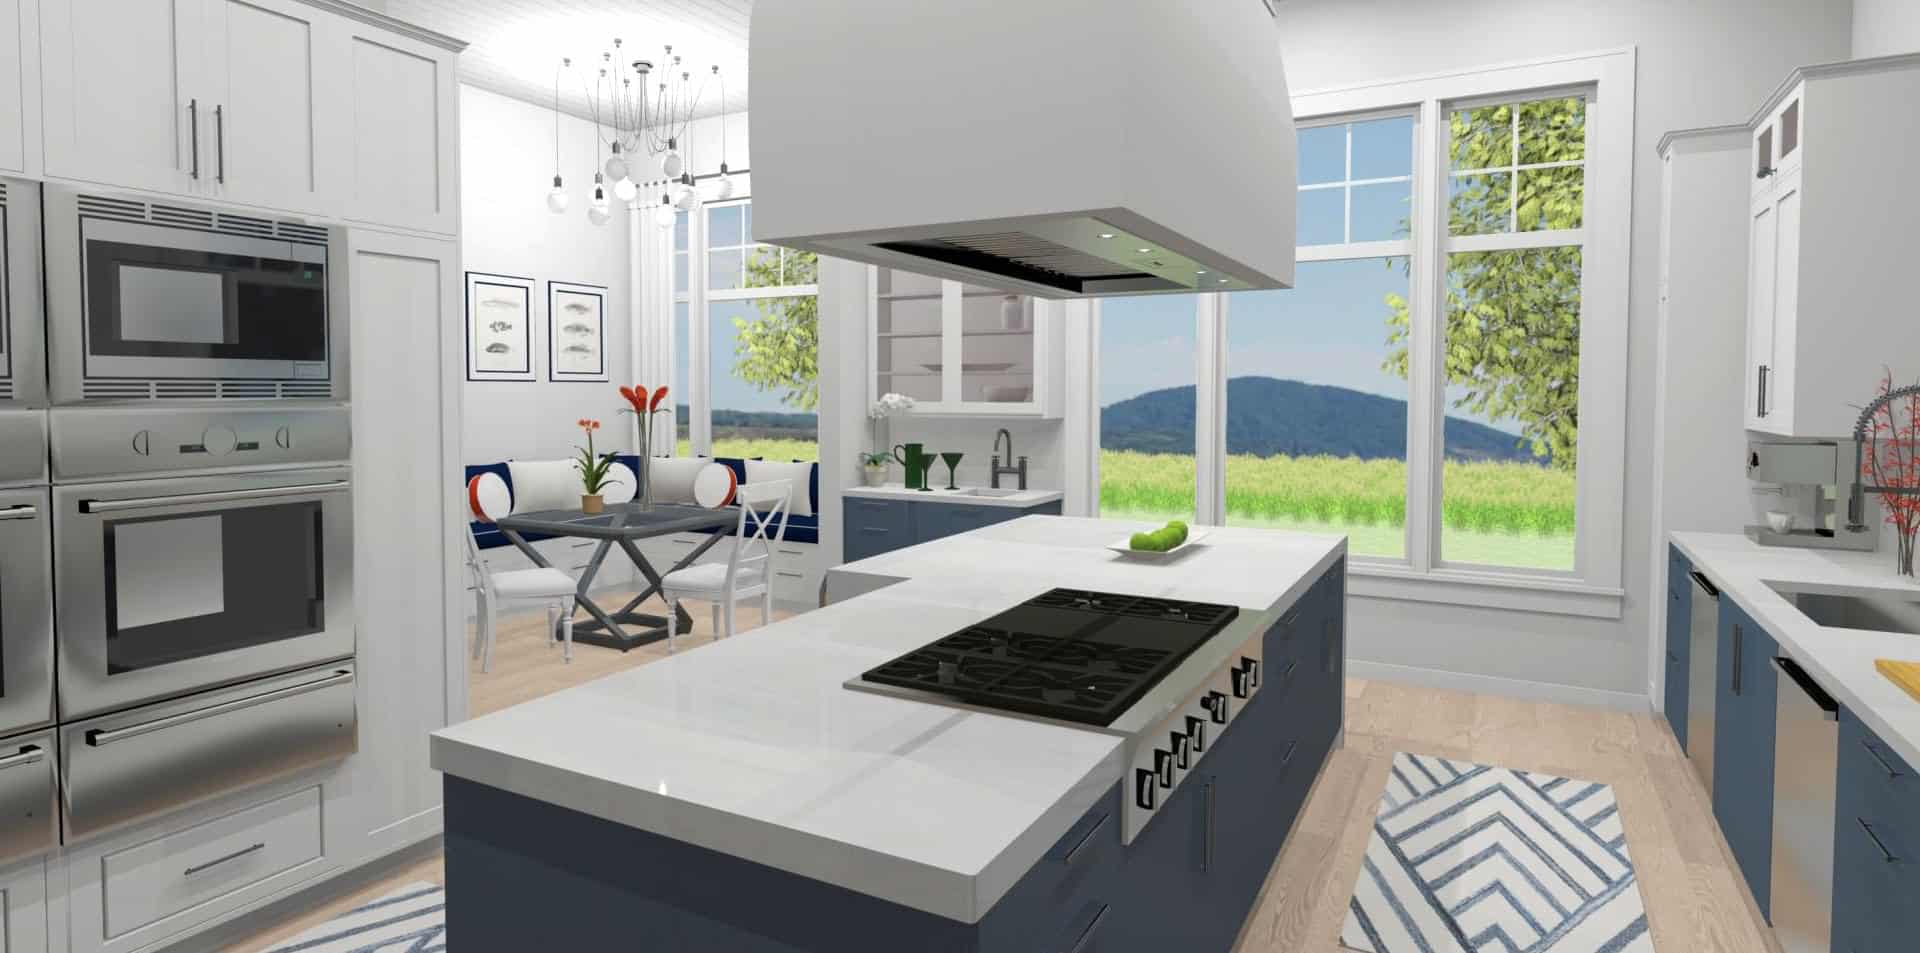 Kitchen 3D layout in white colour